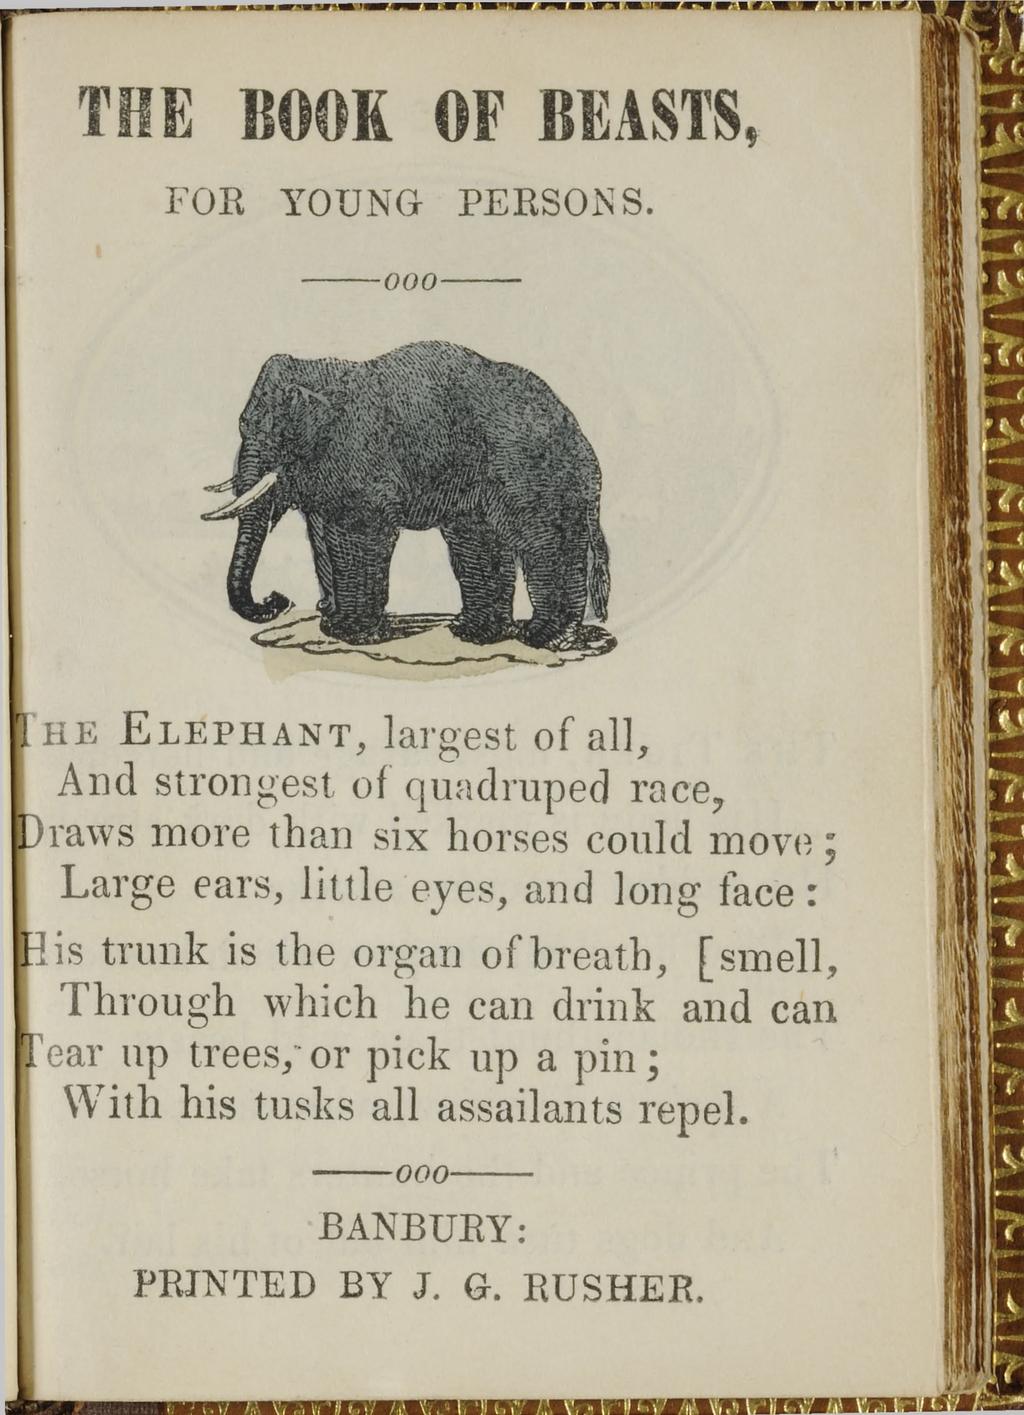 THE BOOK OF BEASTS, FOR YOUNG PERSONS.